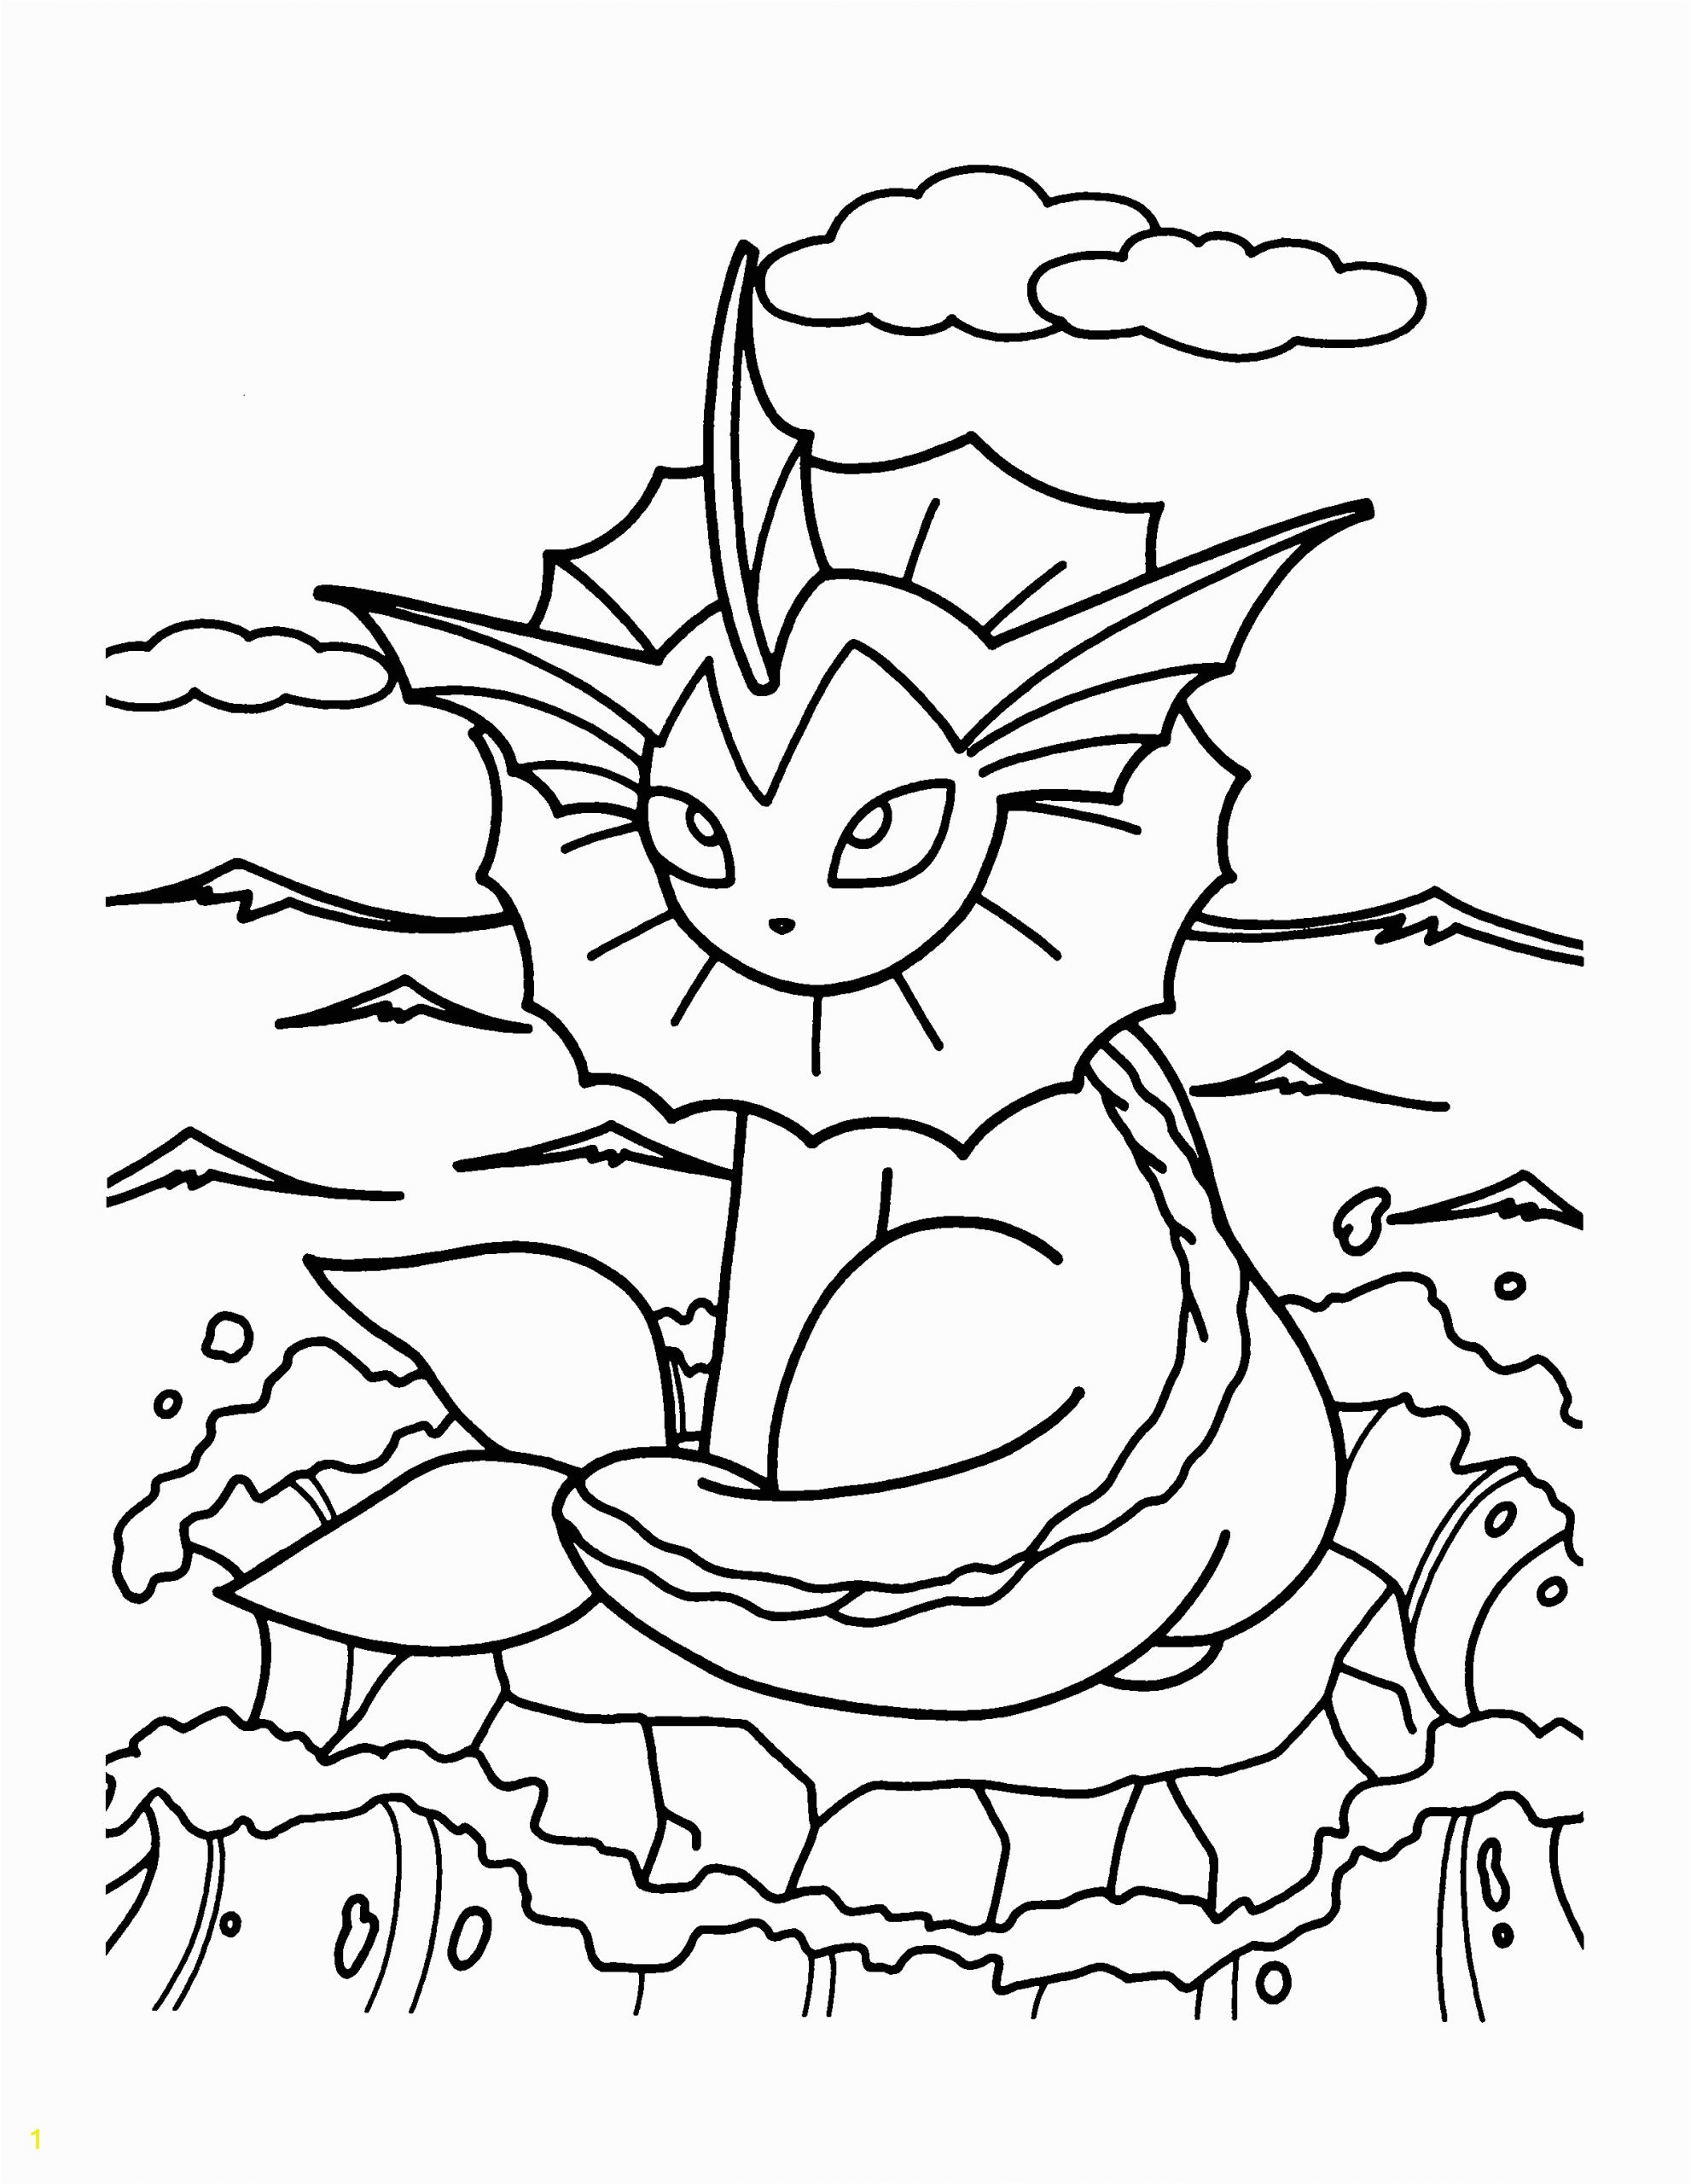 Eevee Pokemon Coloring Pages Pokemon Coloring Pages